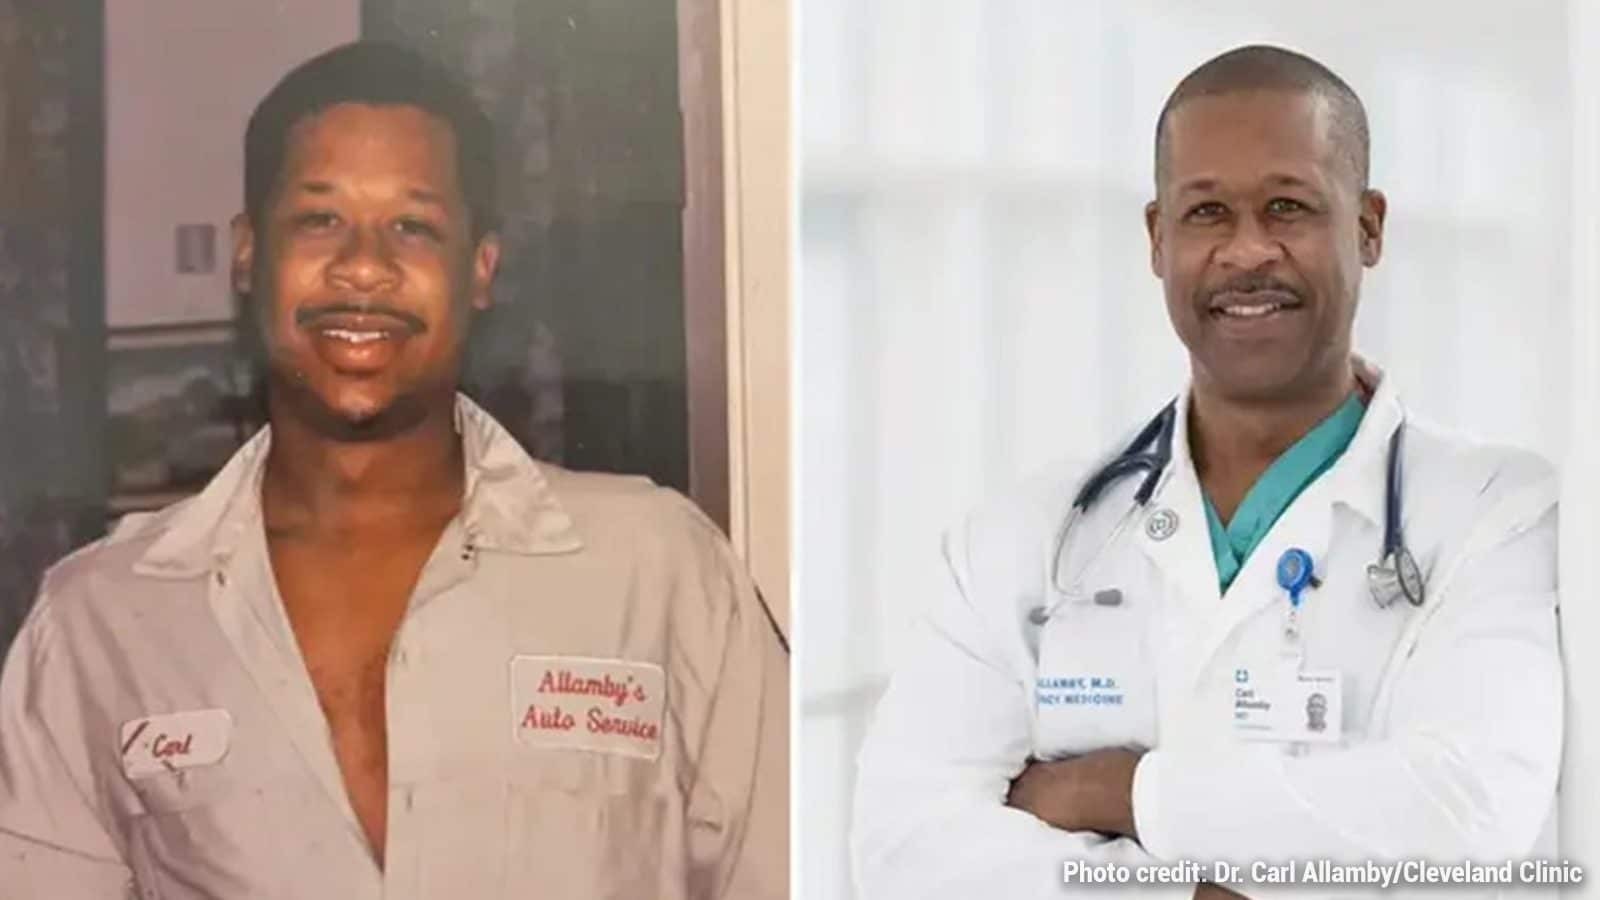 Cleveland Auto Mechanic Becomes Doctor at Age 51